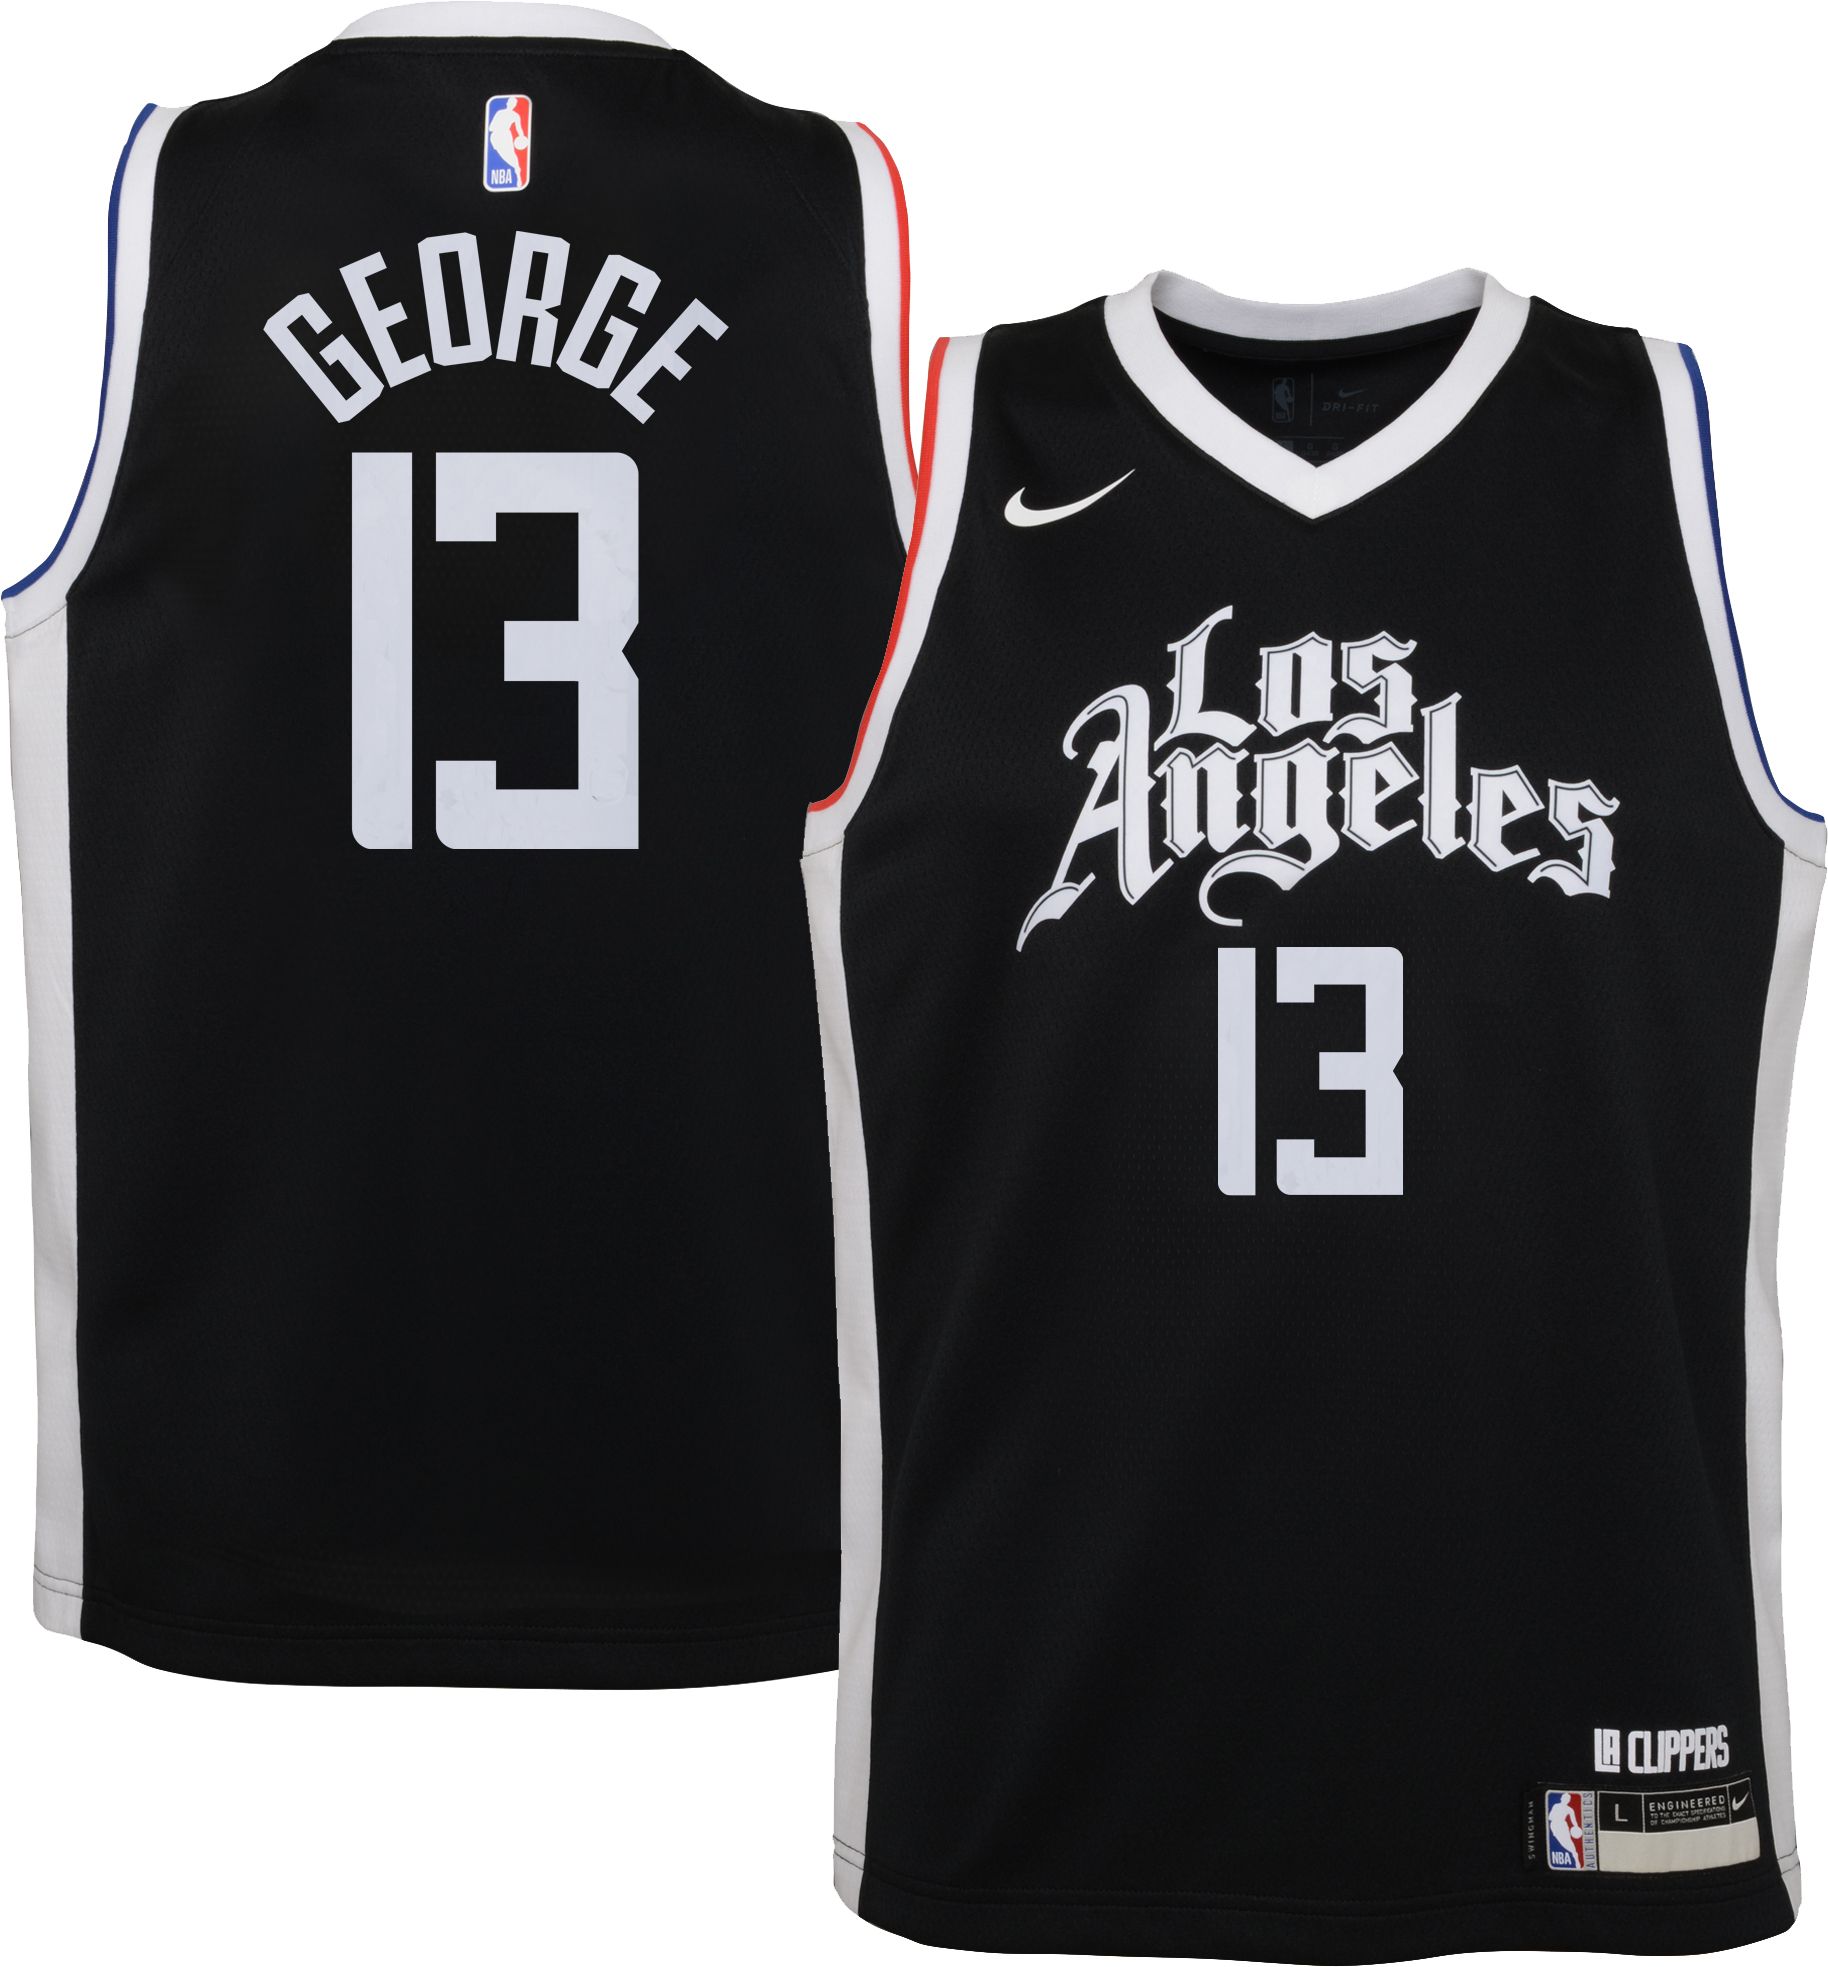 Nike Youth 2021-22 City Edition Los Angeles Clippers Paul George #13 Blue  Swingman Jersey